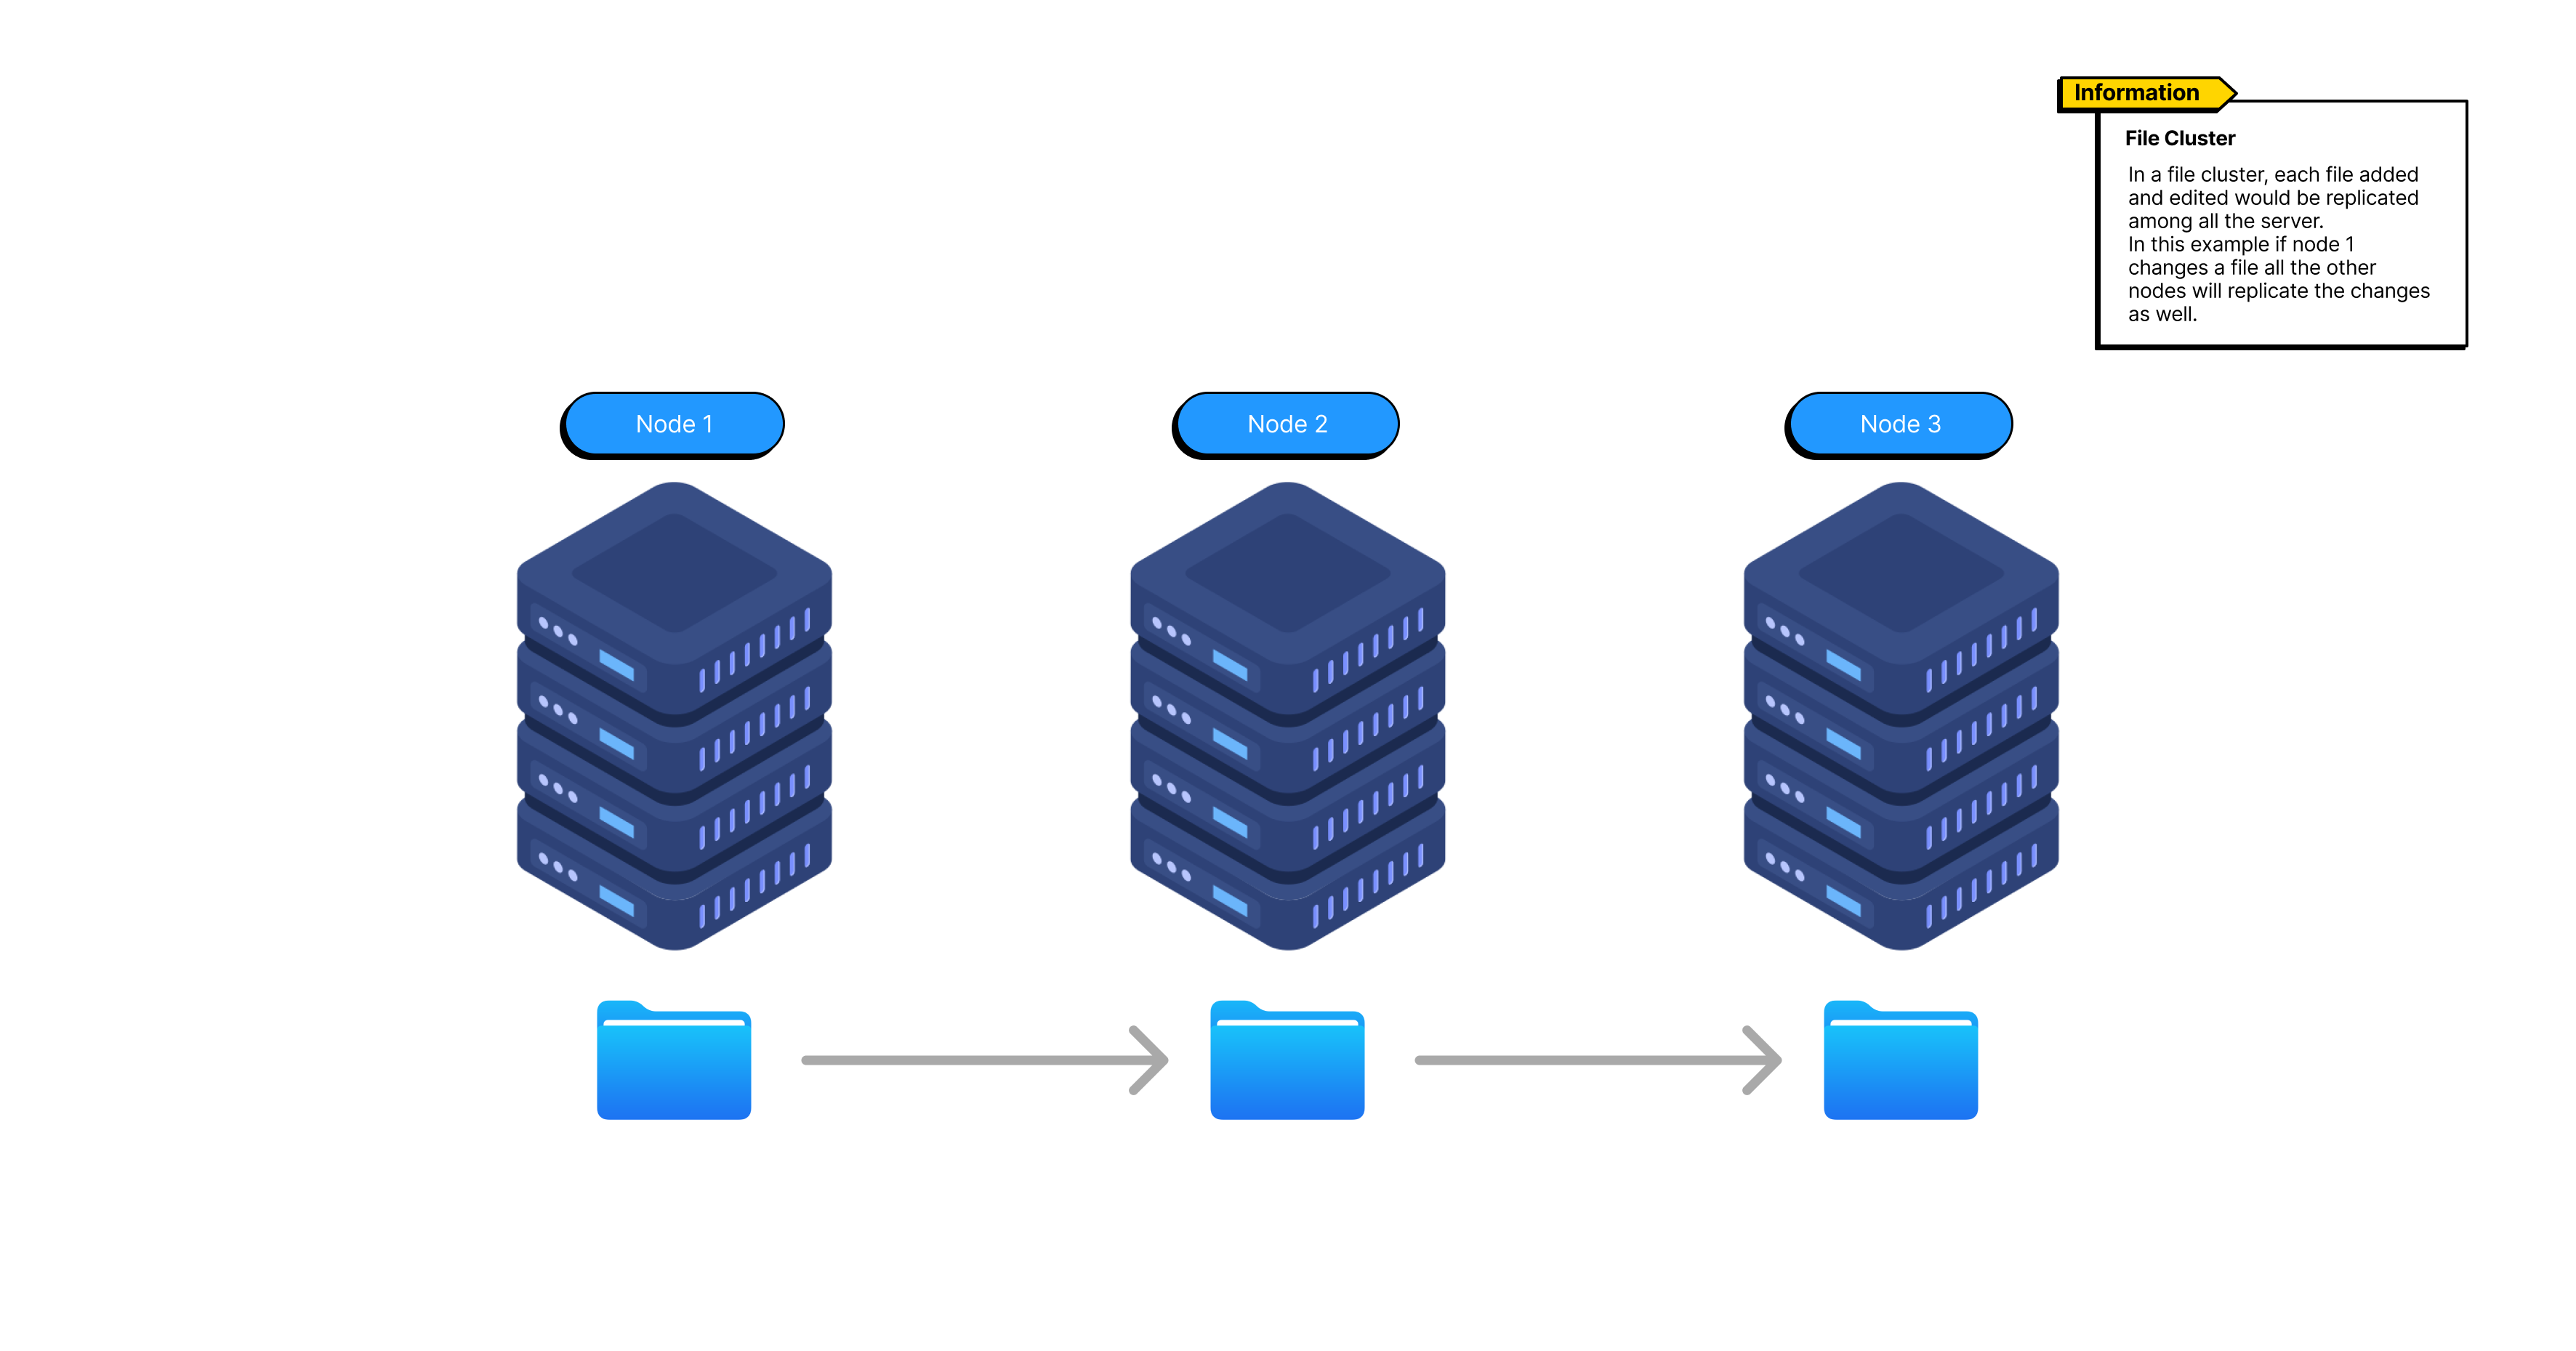 A File cluster